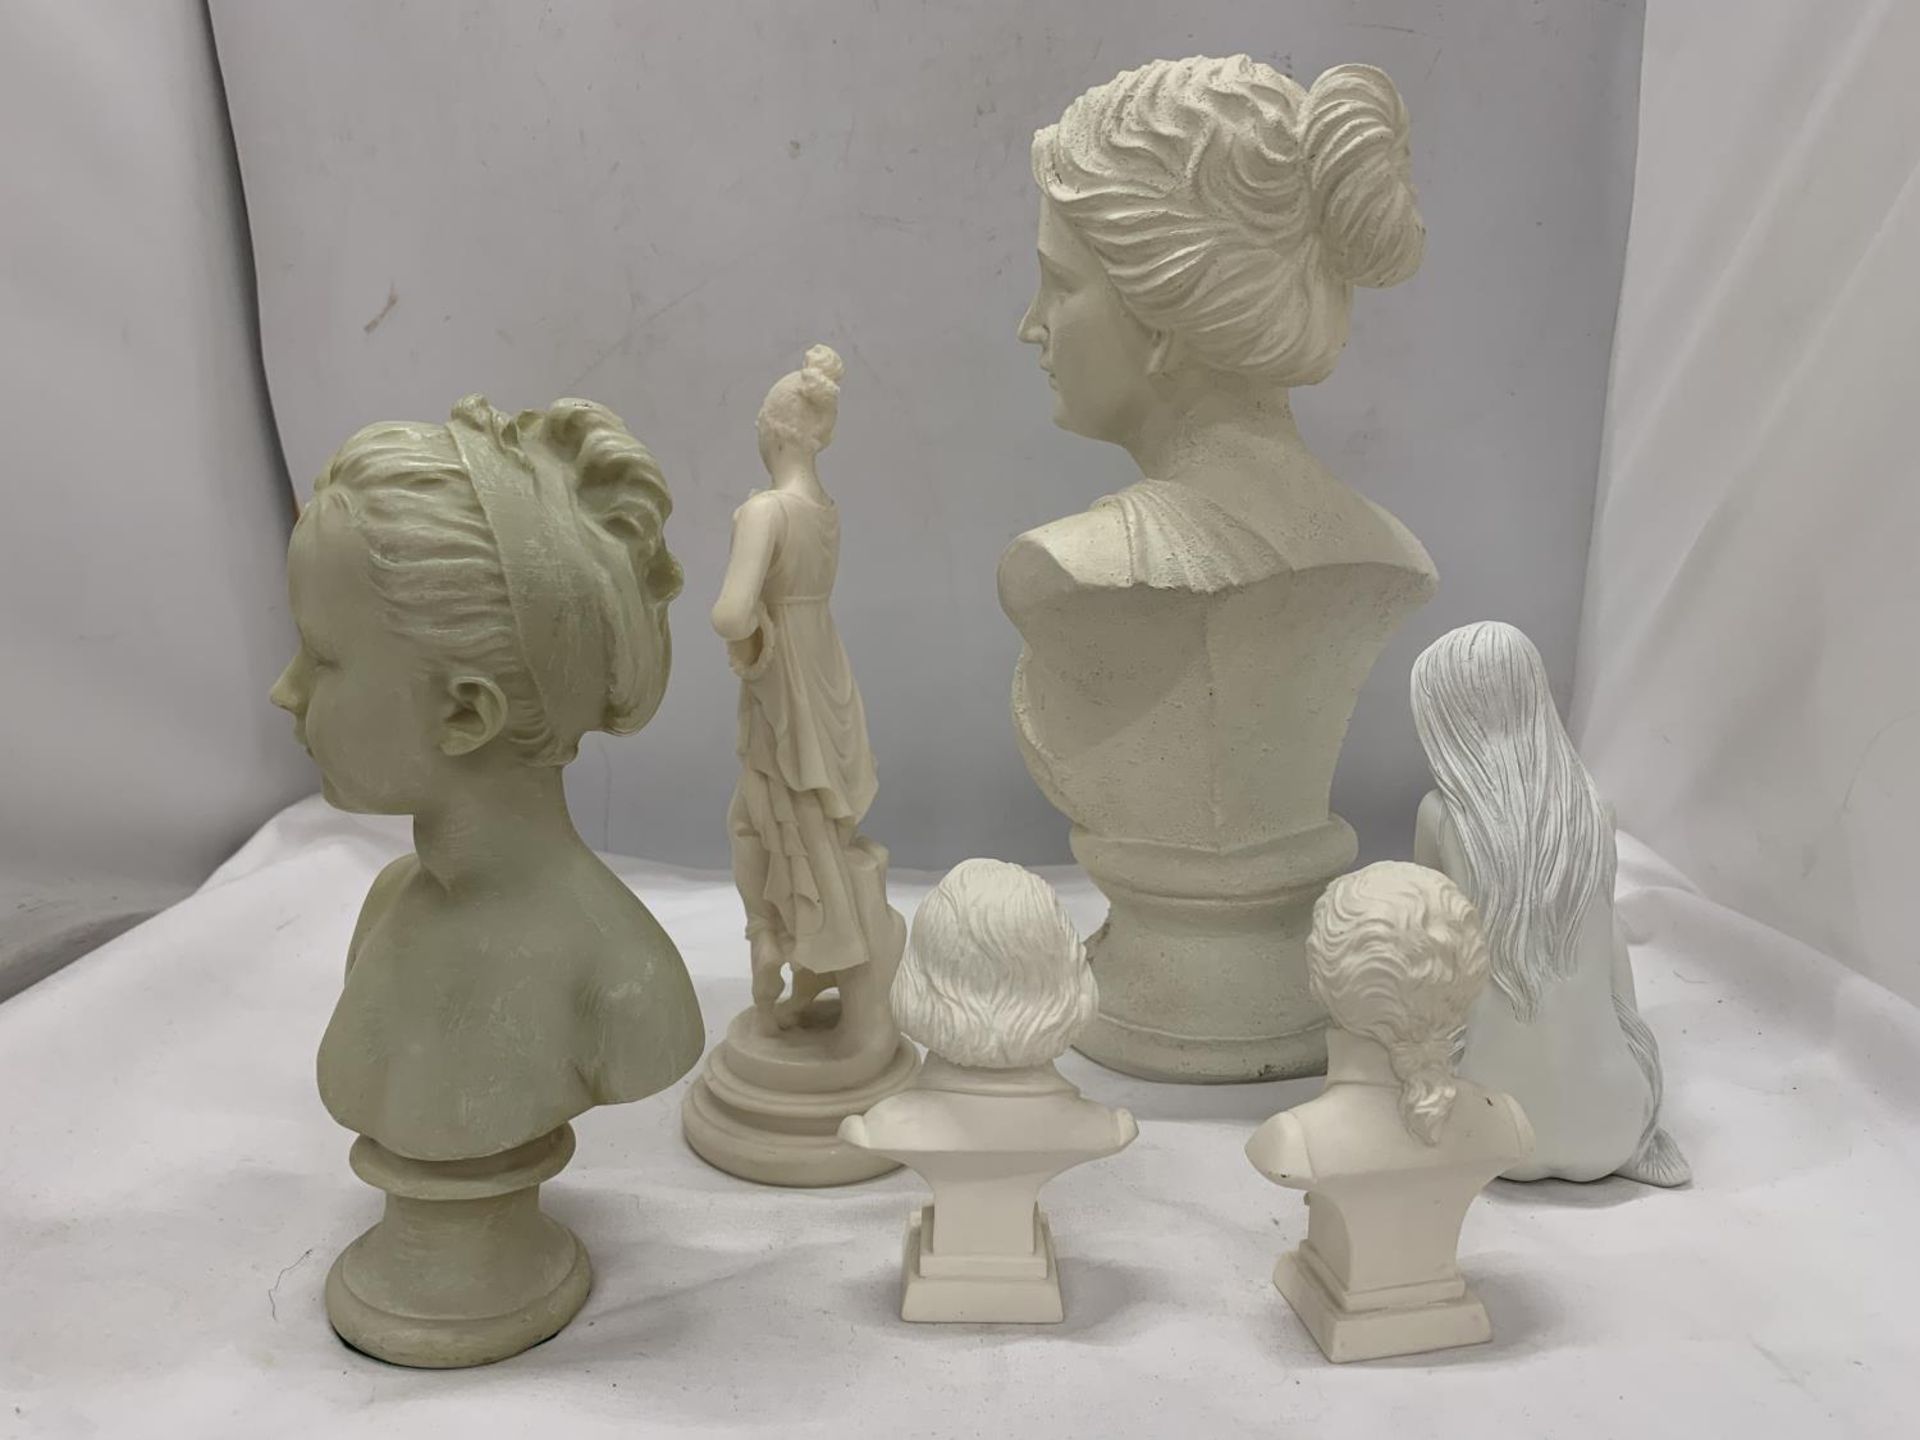 FOUR BUSTS OF FIGURES PLUS TWO LADY FIGURINES - Image 3 of 3